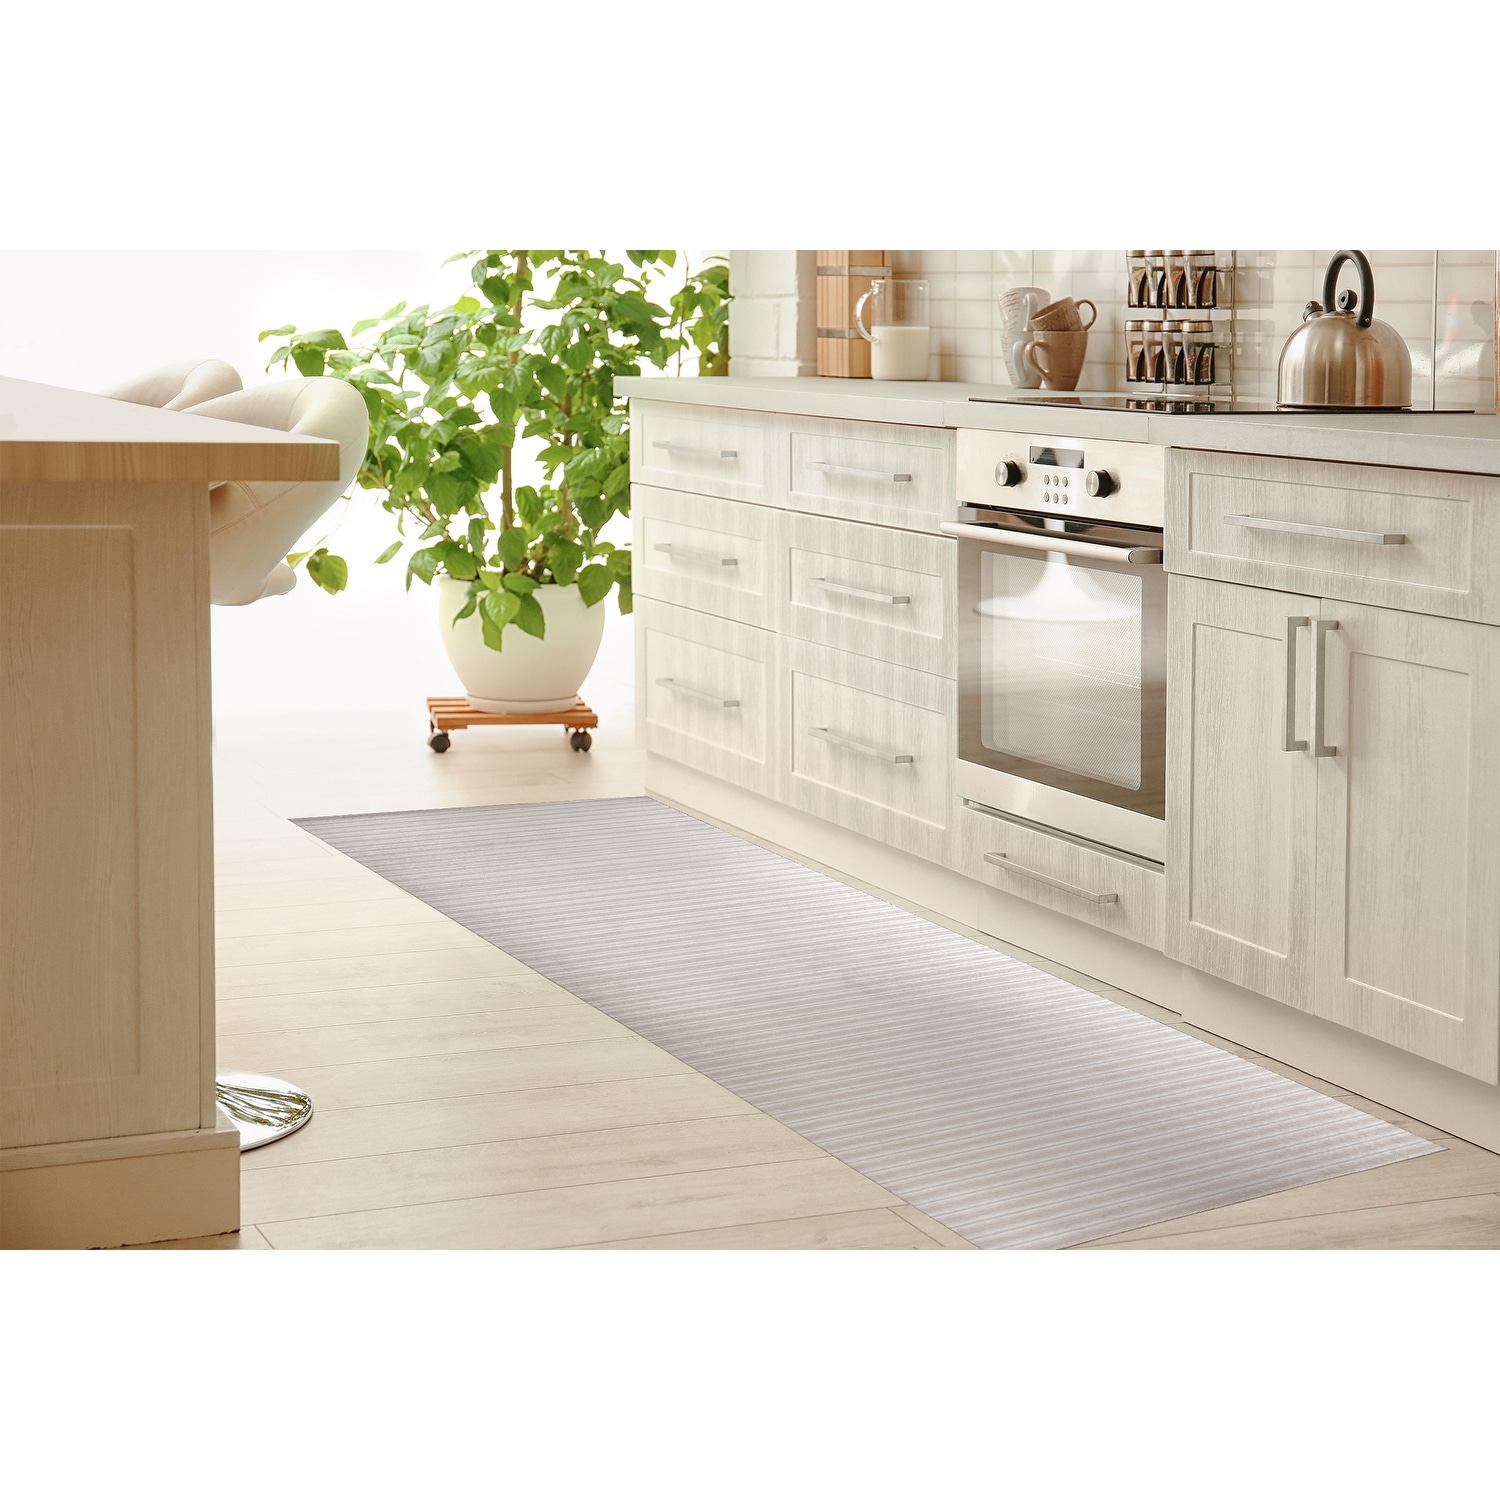 https://ak1.ostkcdn.com/images/products/is/images/direct/cca4ec1a76e303a1196fd32a233721ae729efc66/CLASSIC-STRIPE-BEIGE-SMALL-SCALE-Kitchen-Mat-by-Kavka-Designs.jpg